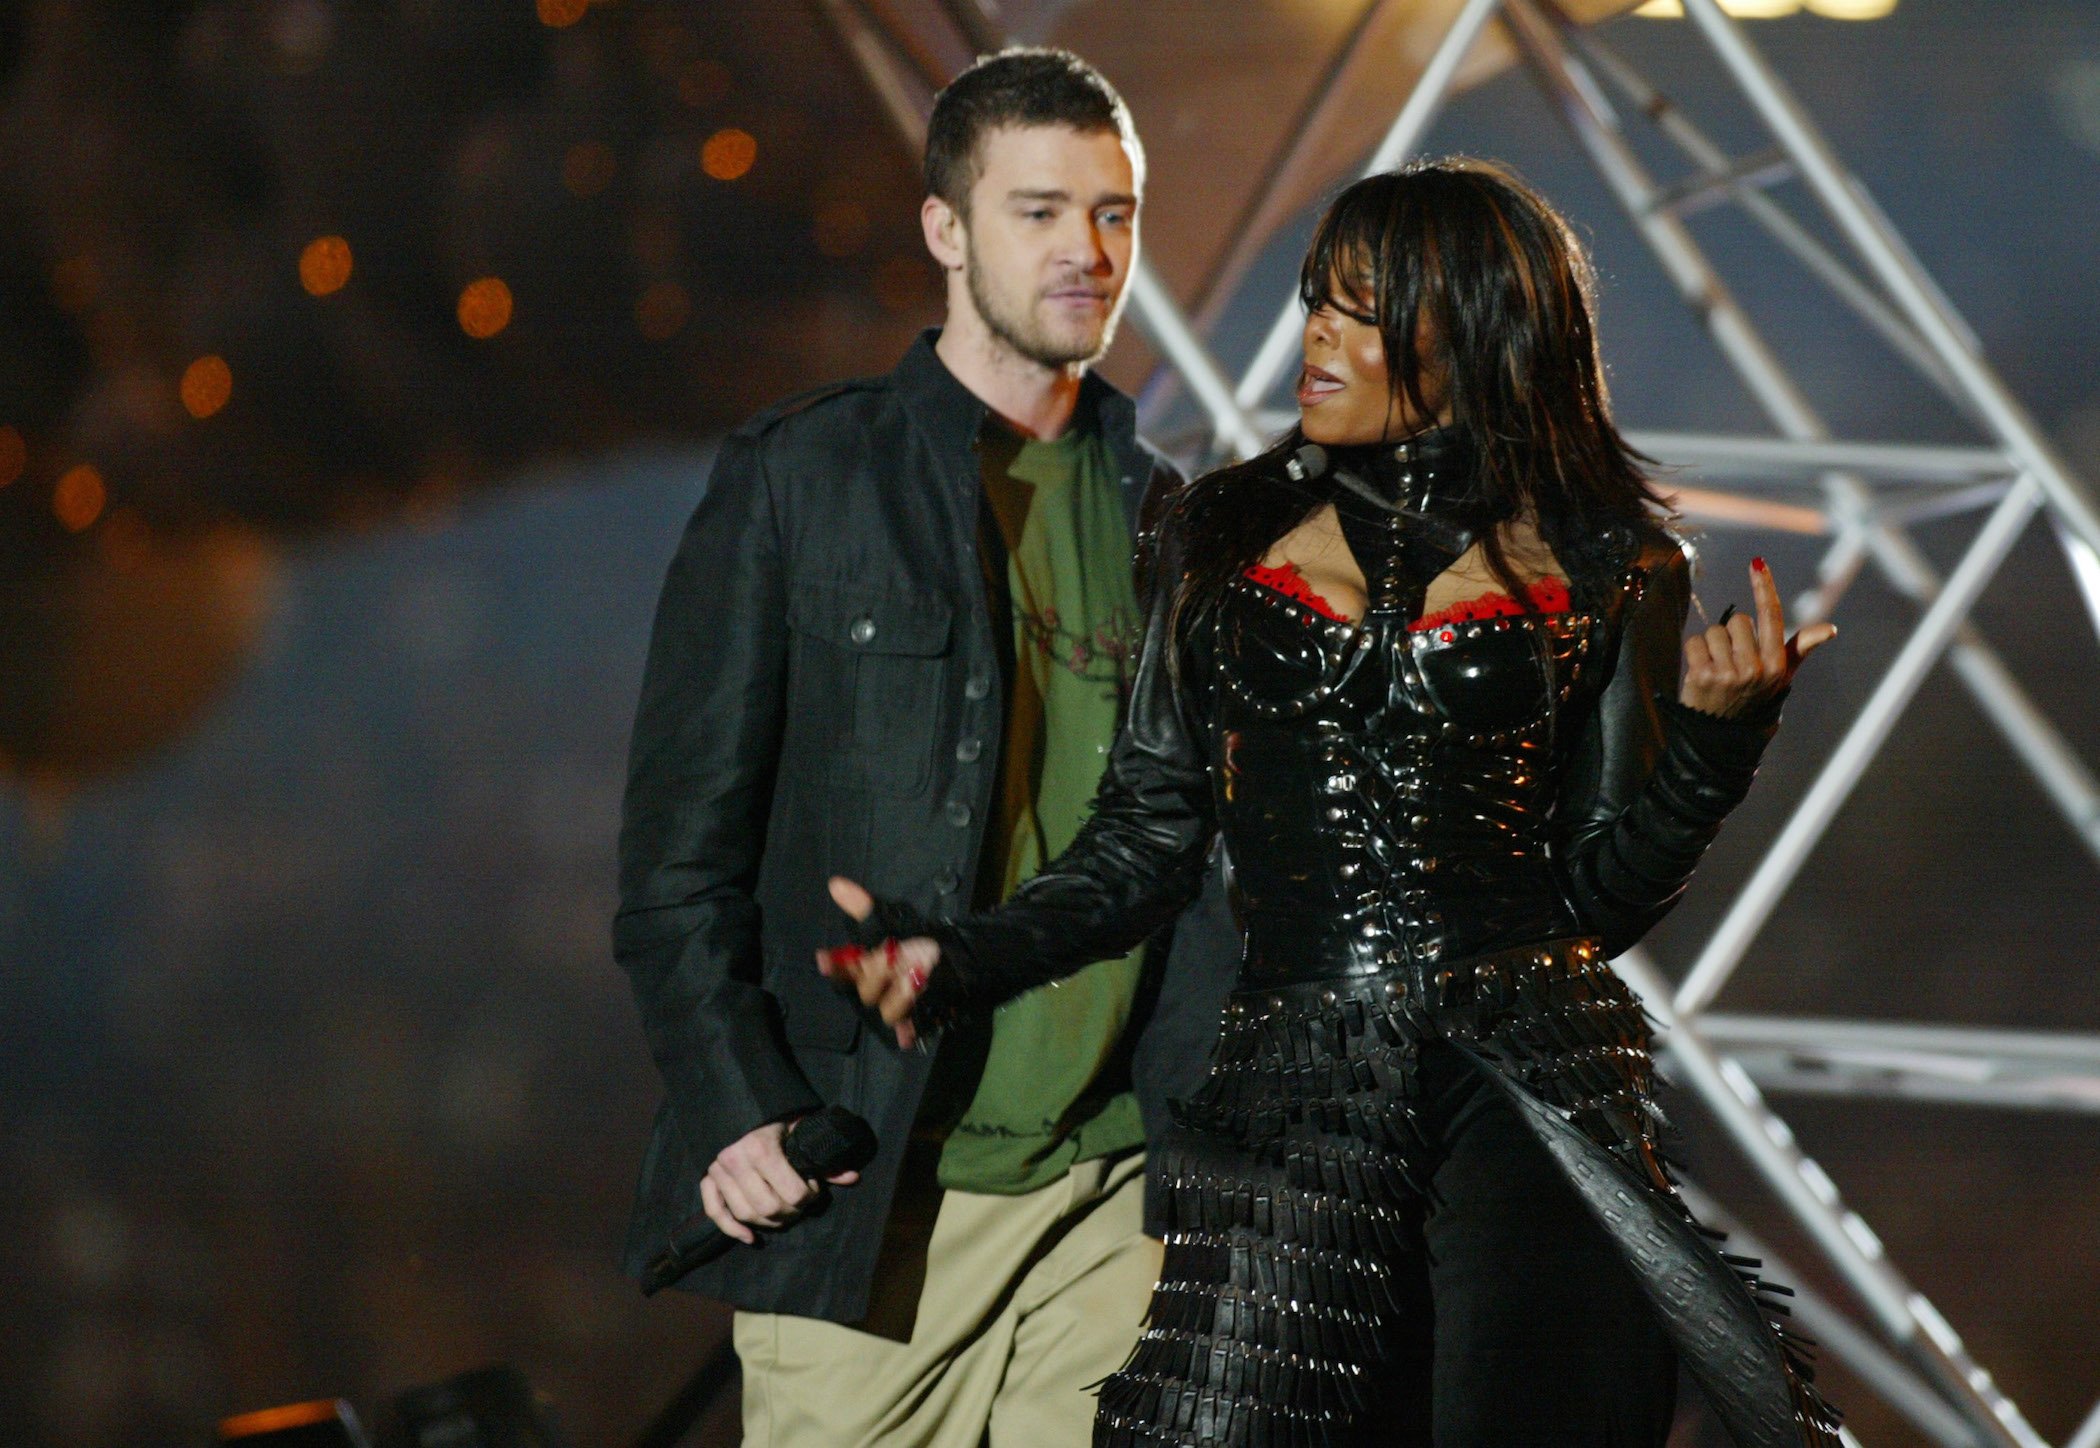 Justin Timberlake and Janet Jackson perform during the Super Bowl in 2004